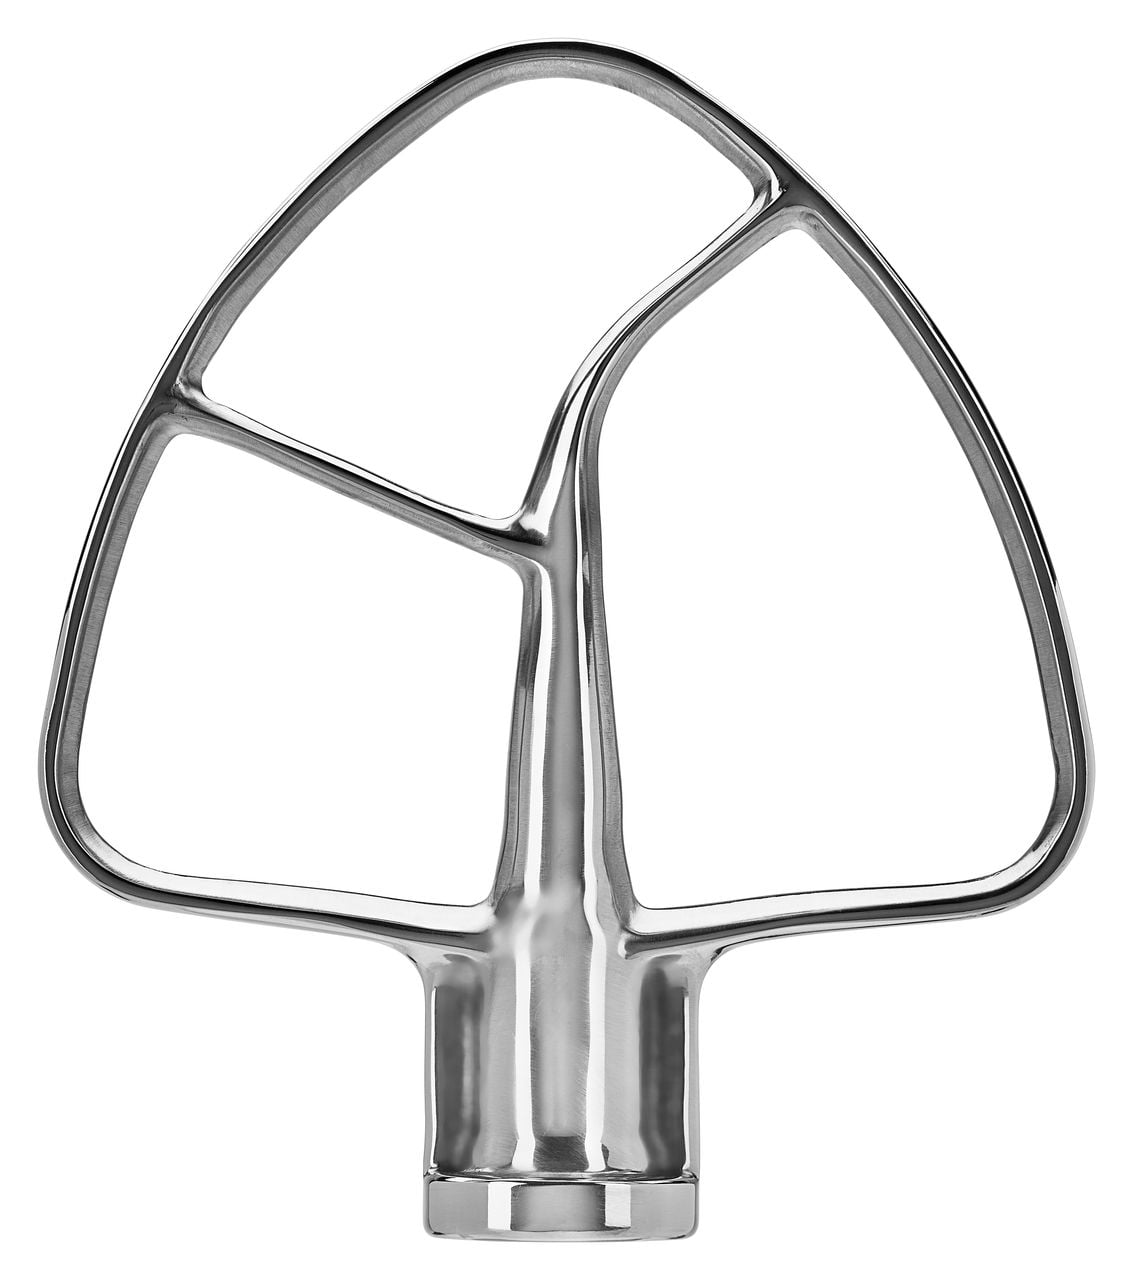 Replacement parts,Stainless steel Flat Beater Attachment,compatible with  Kitchenaid 6Qt，7 Qt and 8 Quart Stand Mixers(KP26M1, KP26M1XFQ,KSM7990